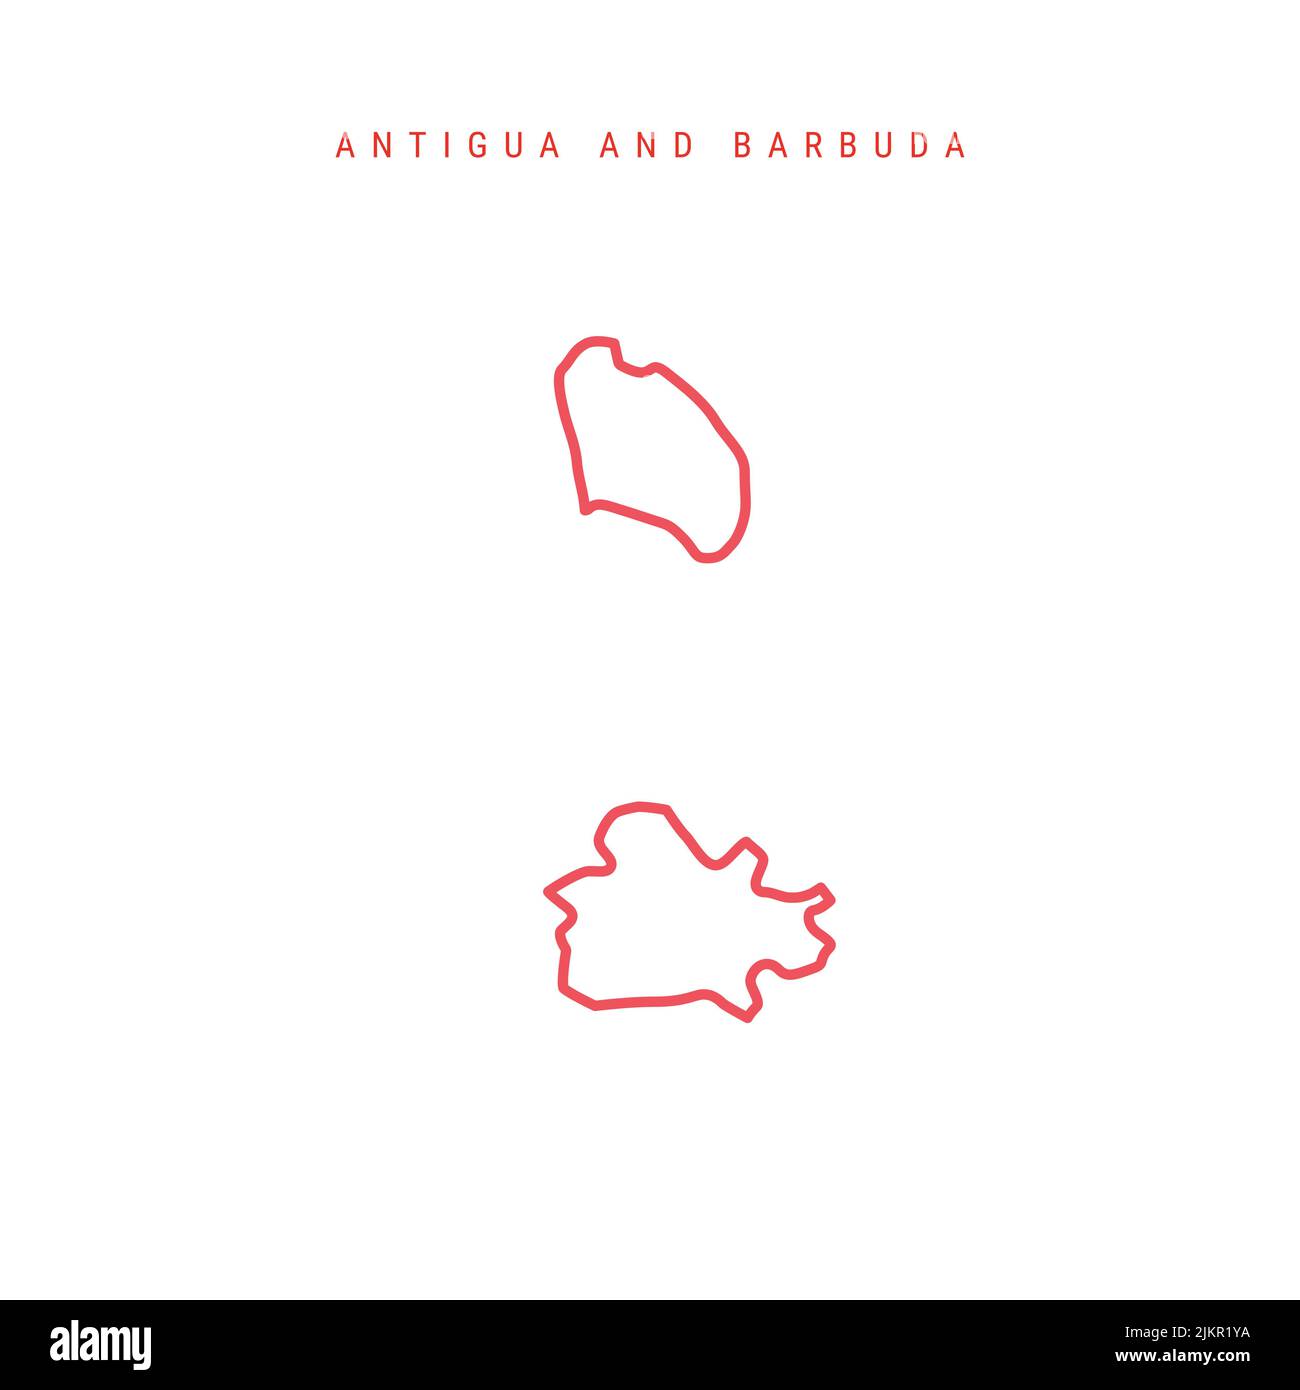 Antigua and Barbuda editable outline map. Antiguan Barbudan red border. Country name. Adjust line weight. Change to any color. Vector illustration. Stock Vector